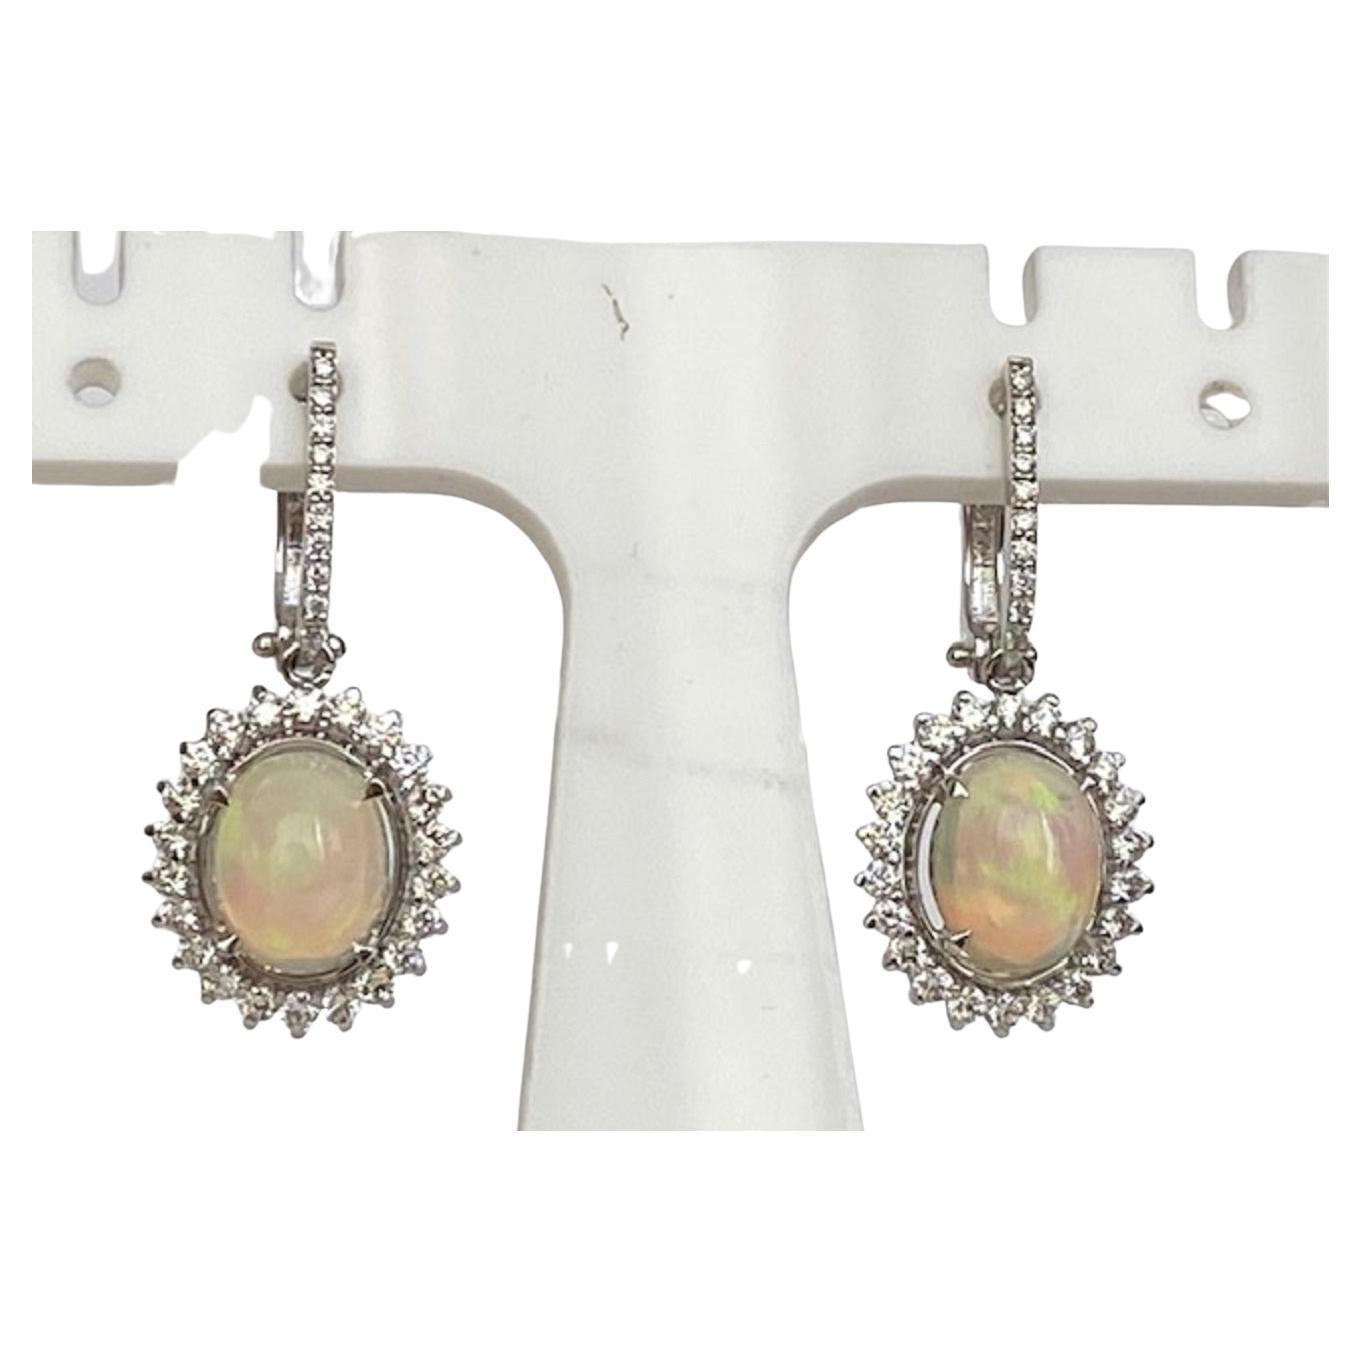 18 Kt. White Gold Earrings with 4.15 Ct Opals and Diamonds